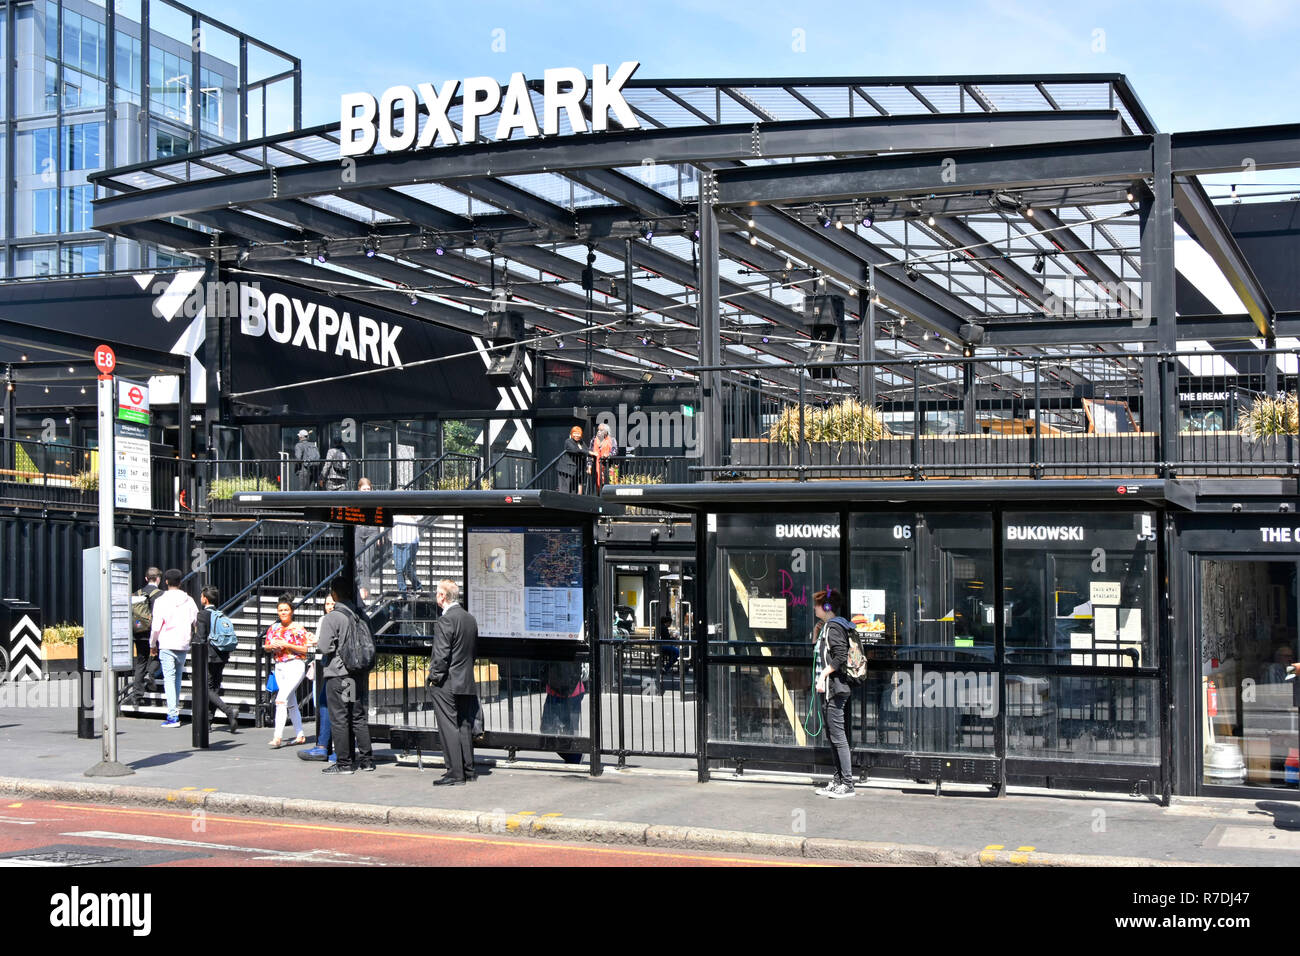 London street scene people wait at public transport bus stop at Boxpark food & retail business built from shipping containers East Croydon England UK Stock Photo